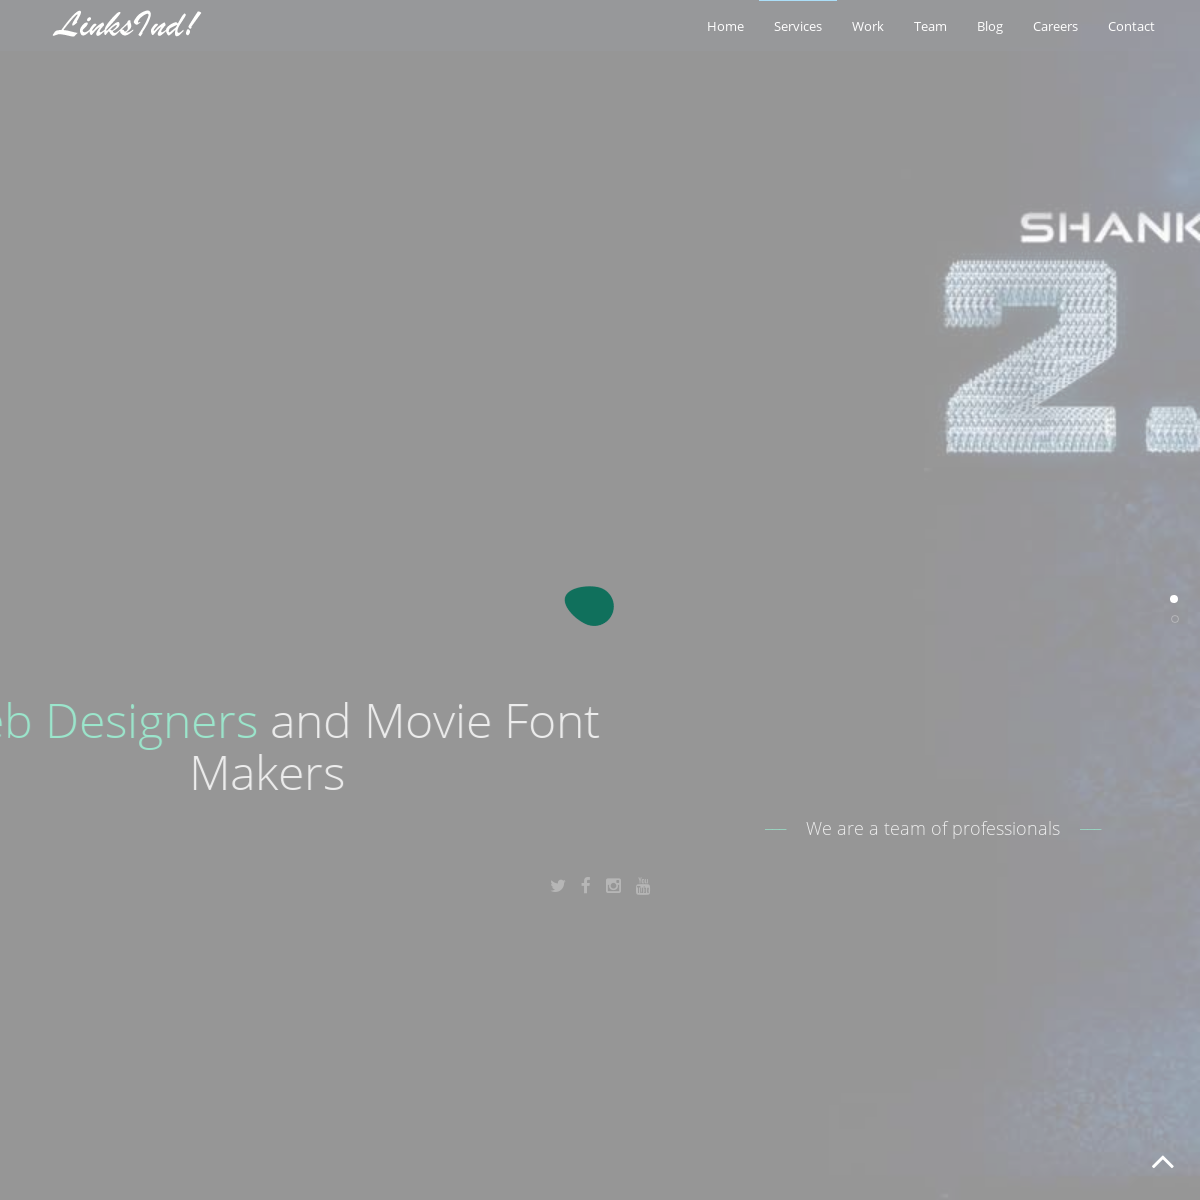 Linksind Web Designers And Movie Font Makers Archived 21 09 30